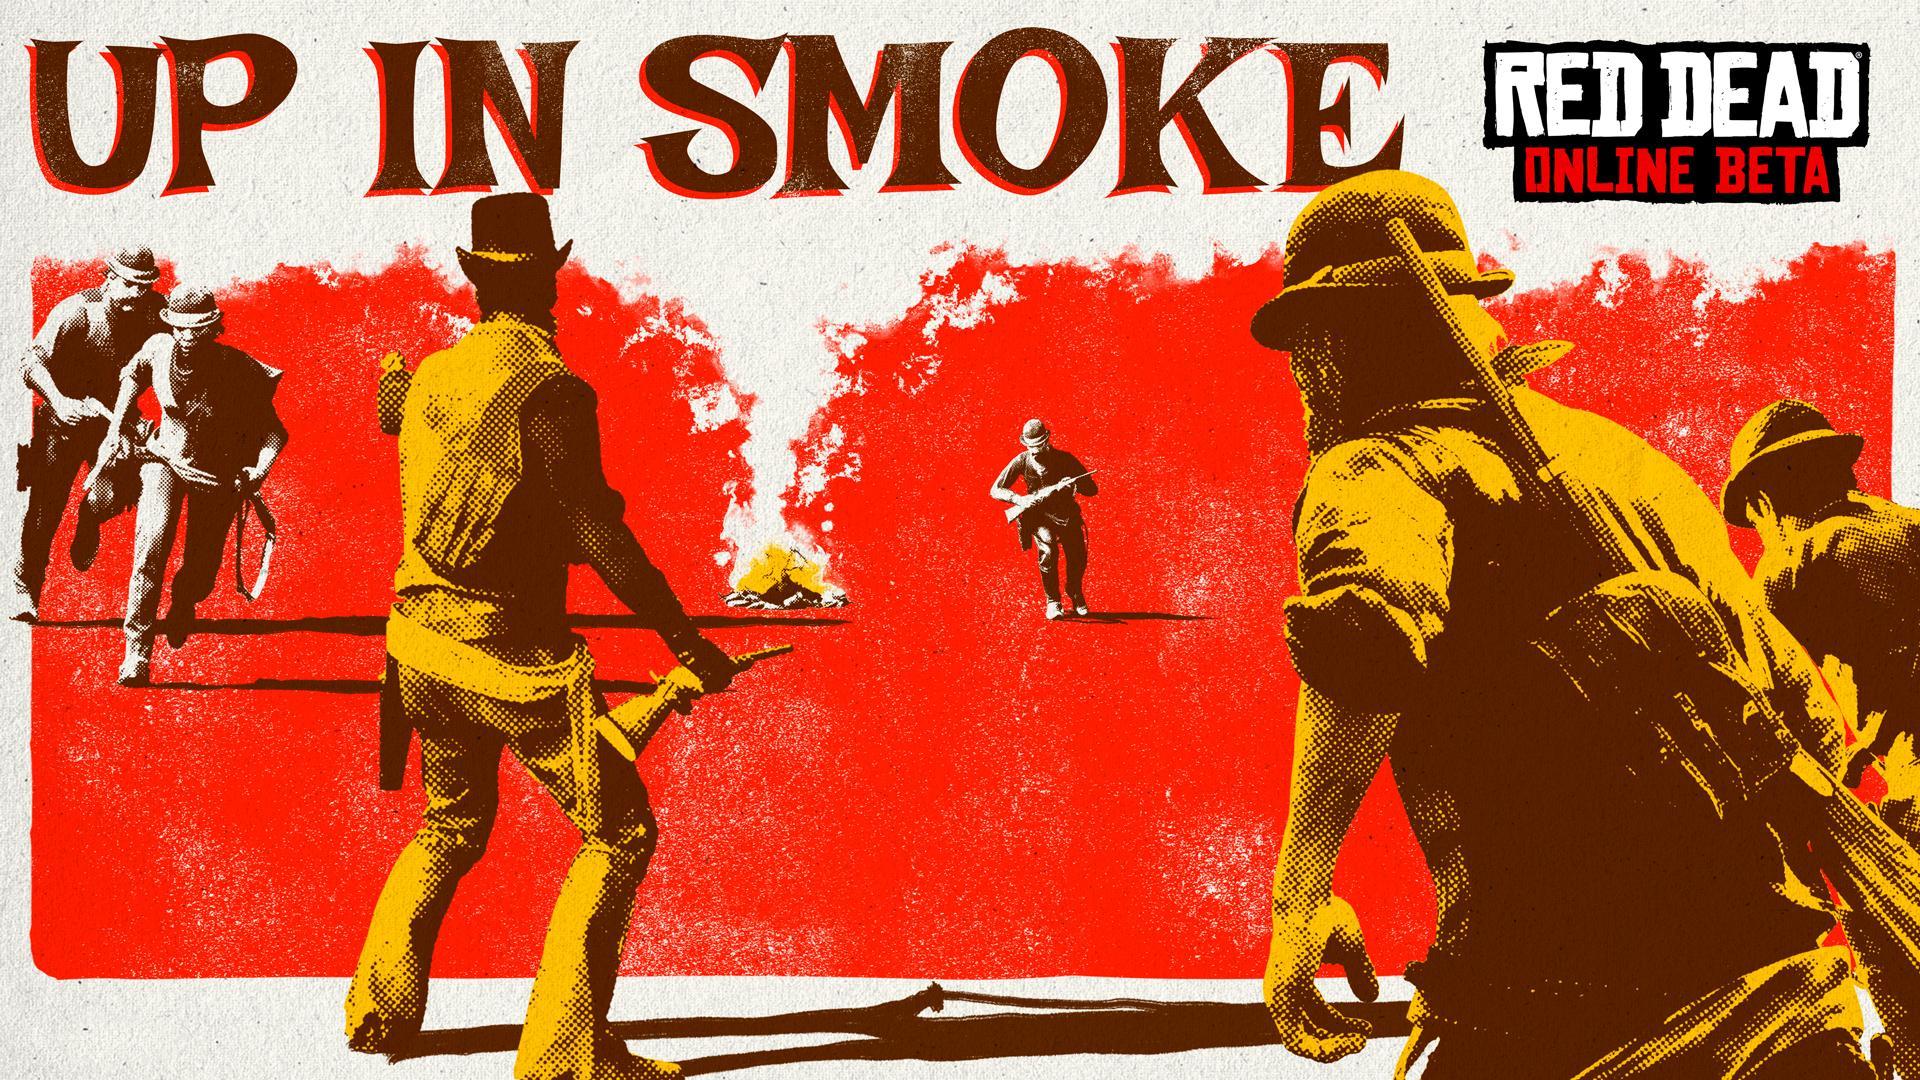 Up In Smoke - Red Dead Online Mode